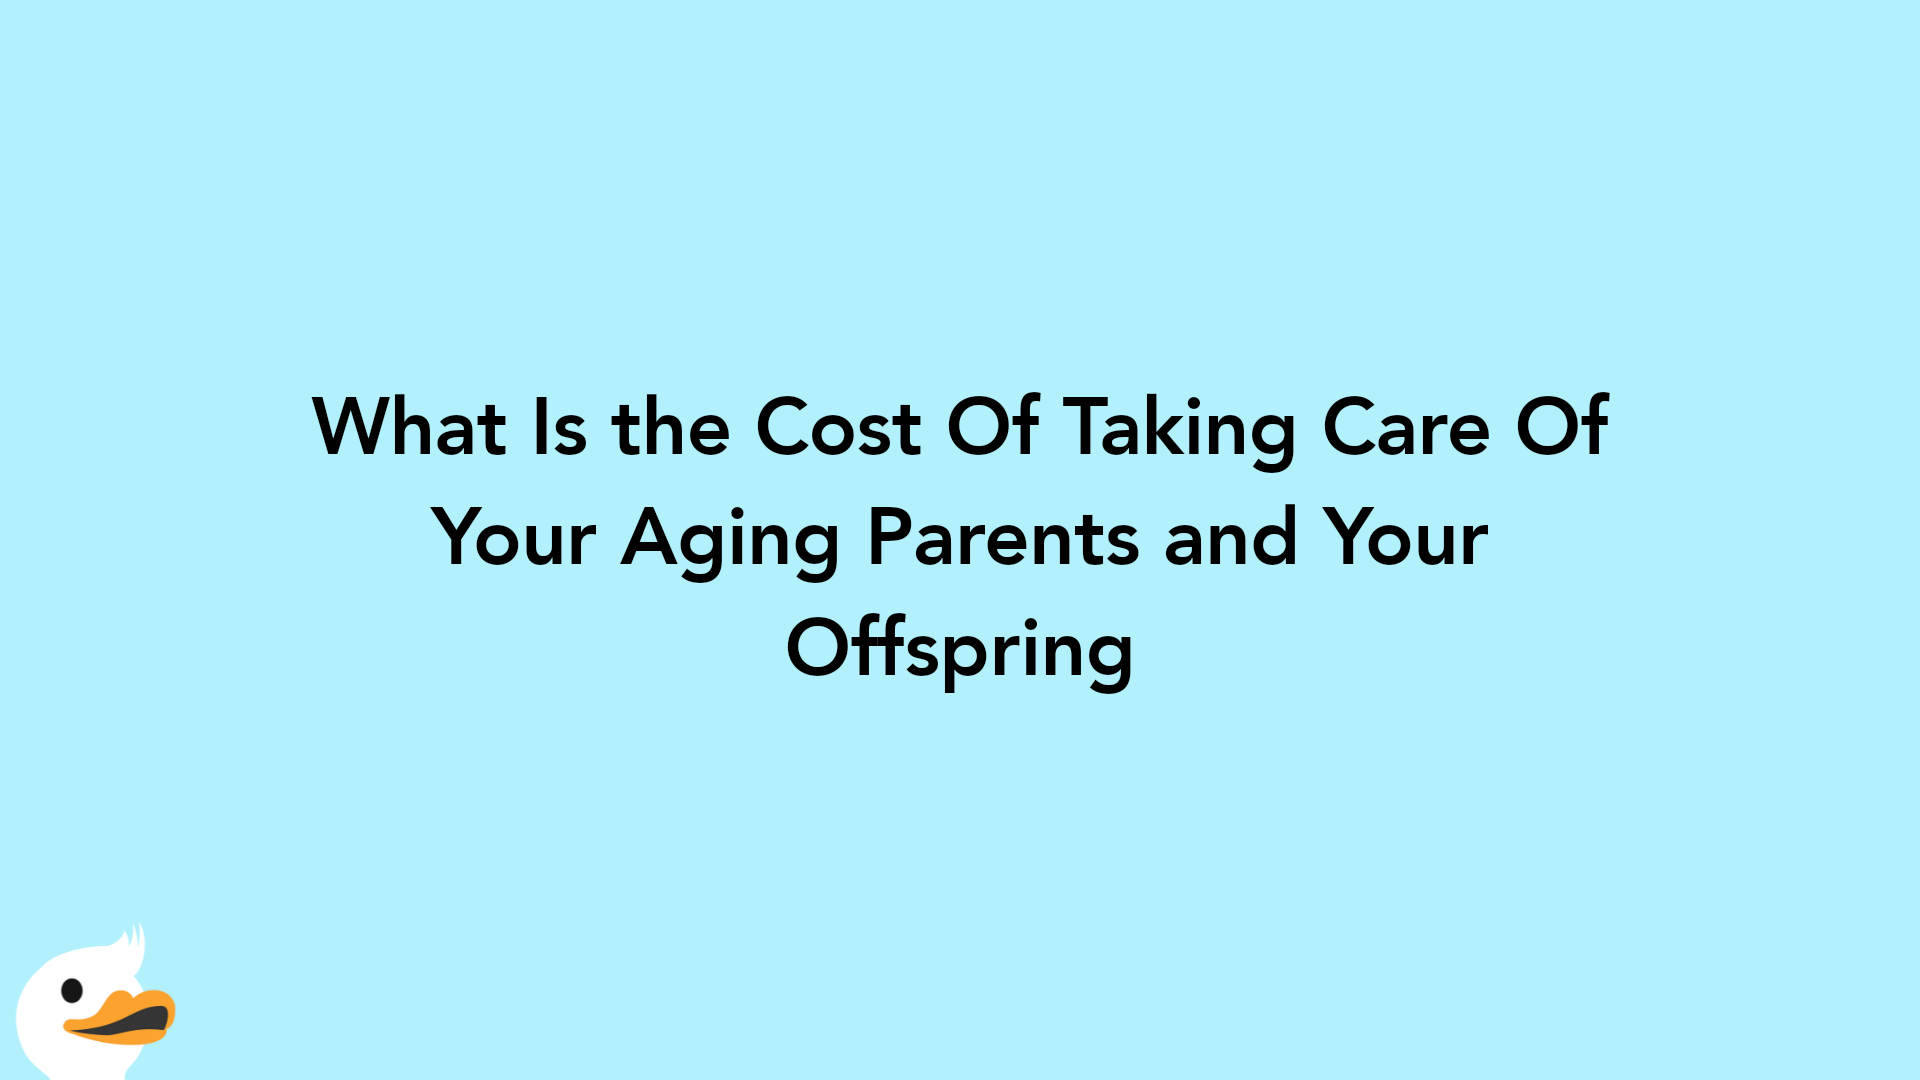 What Is the Cost Of Taking Care Of Your Aging Parents and Your Offspring